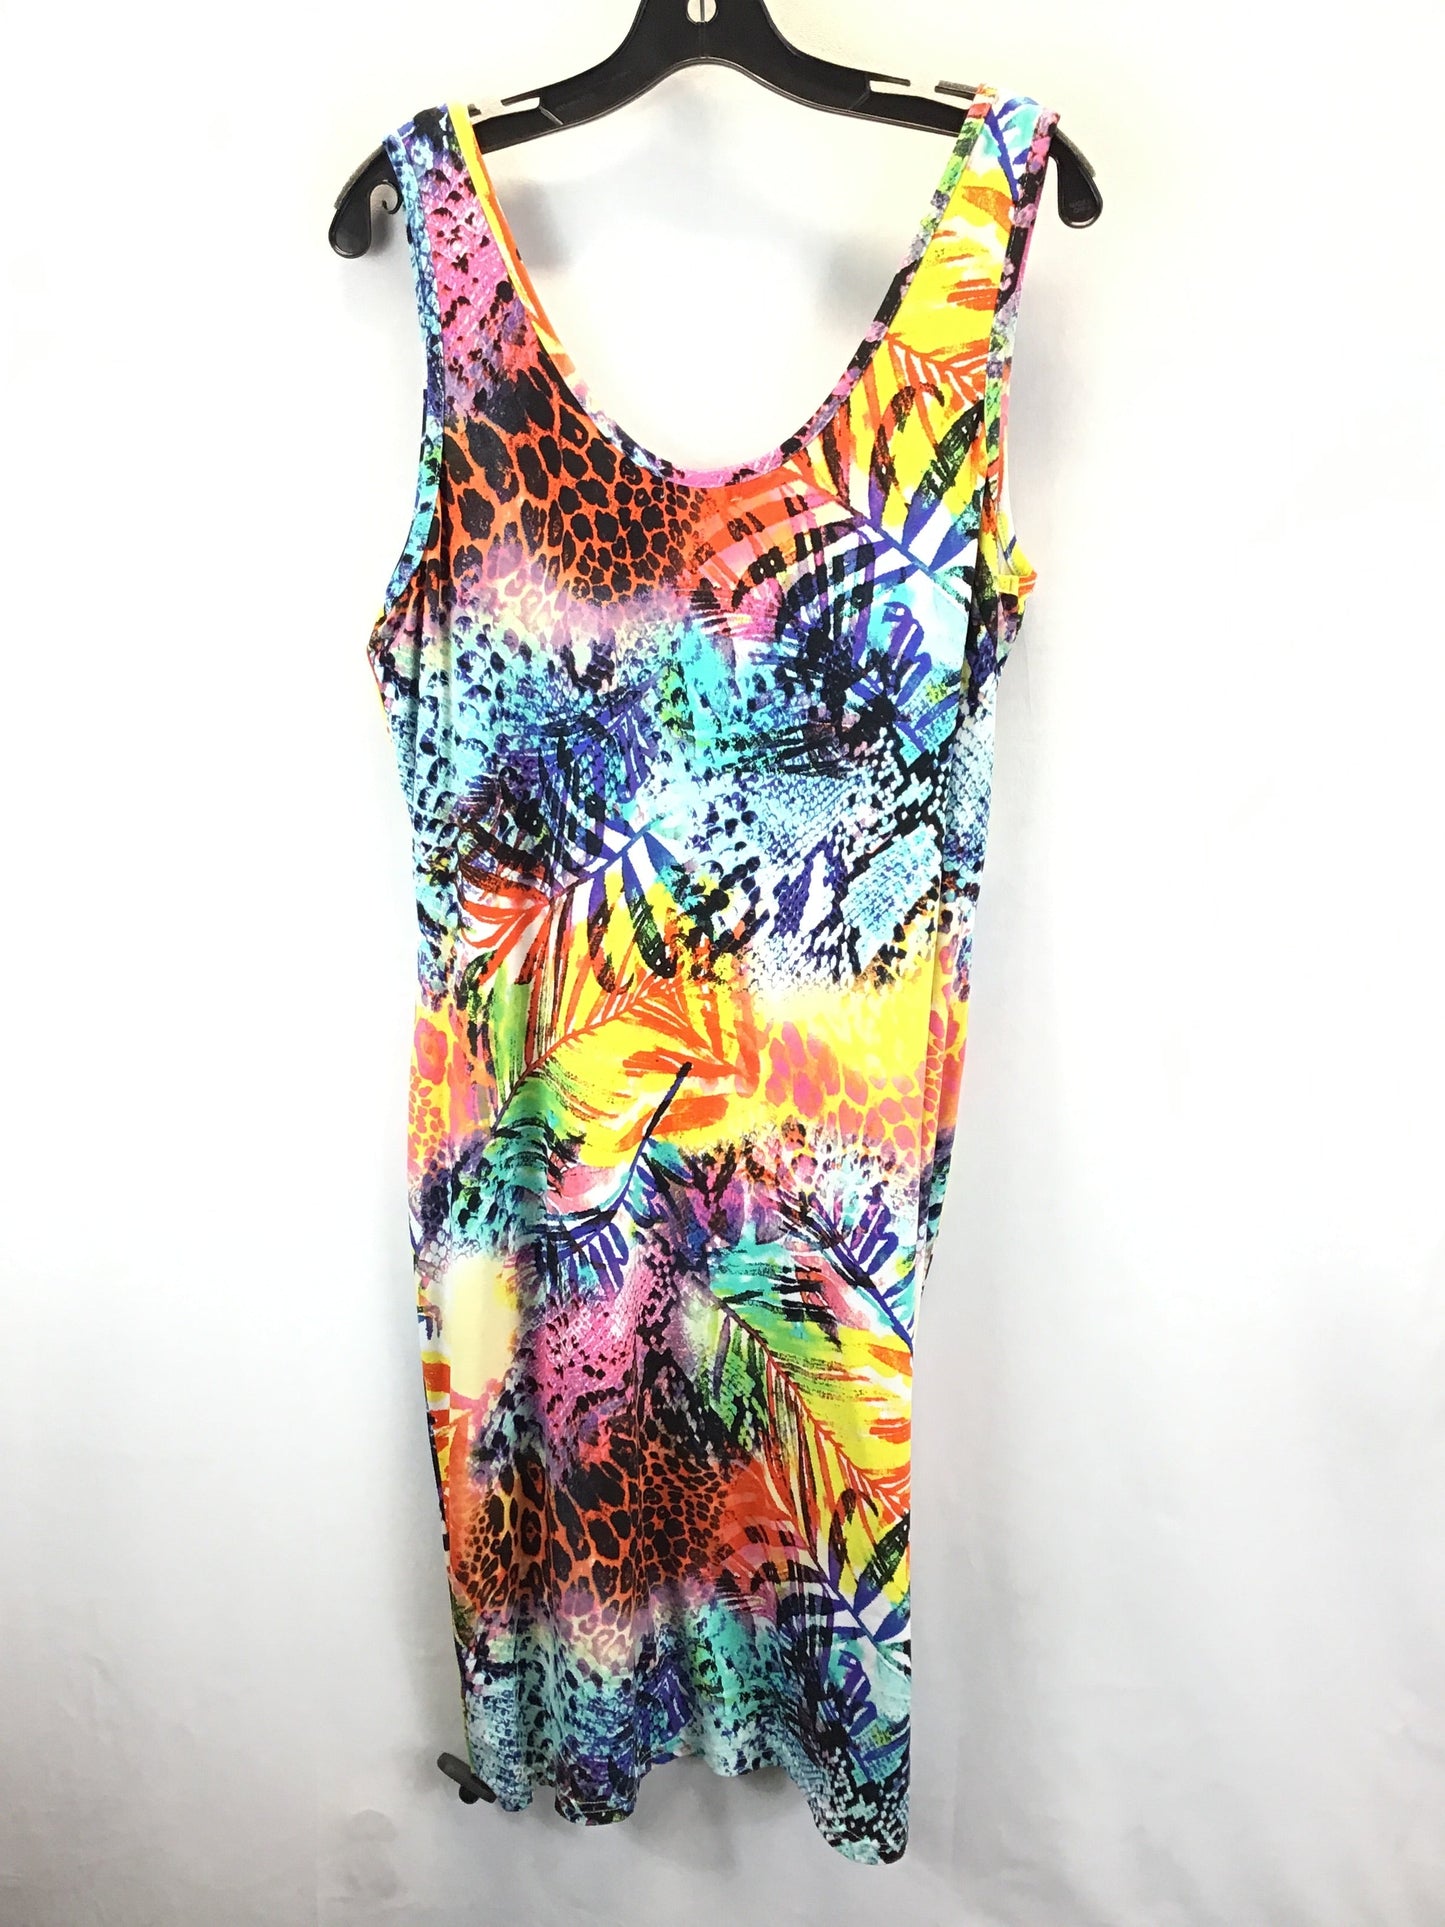 Multi-colored Dress Casual Short Clothes Mentor, Size 2x